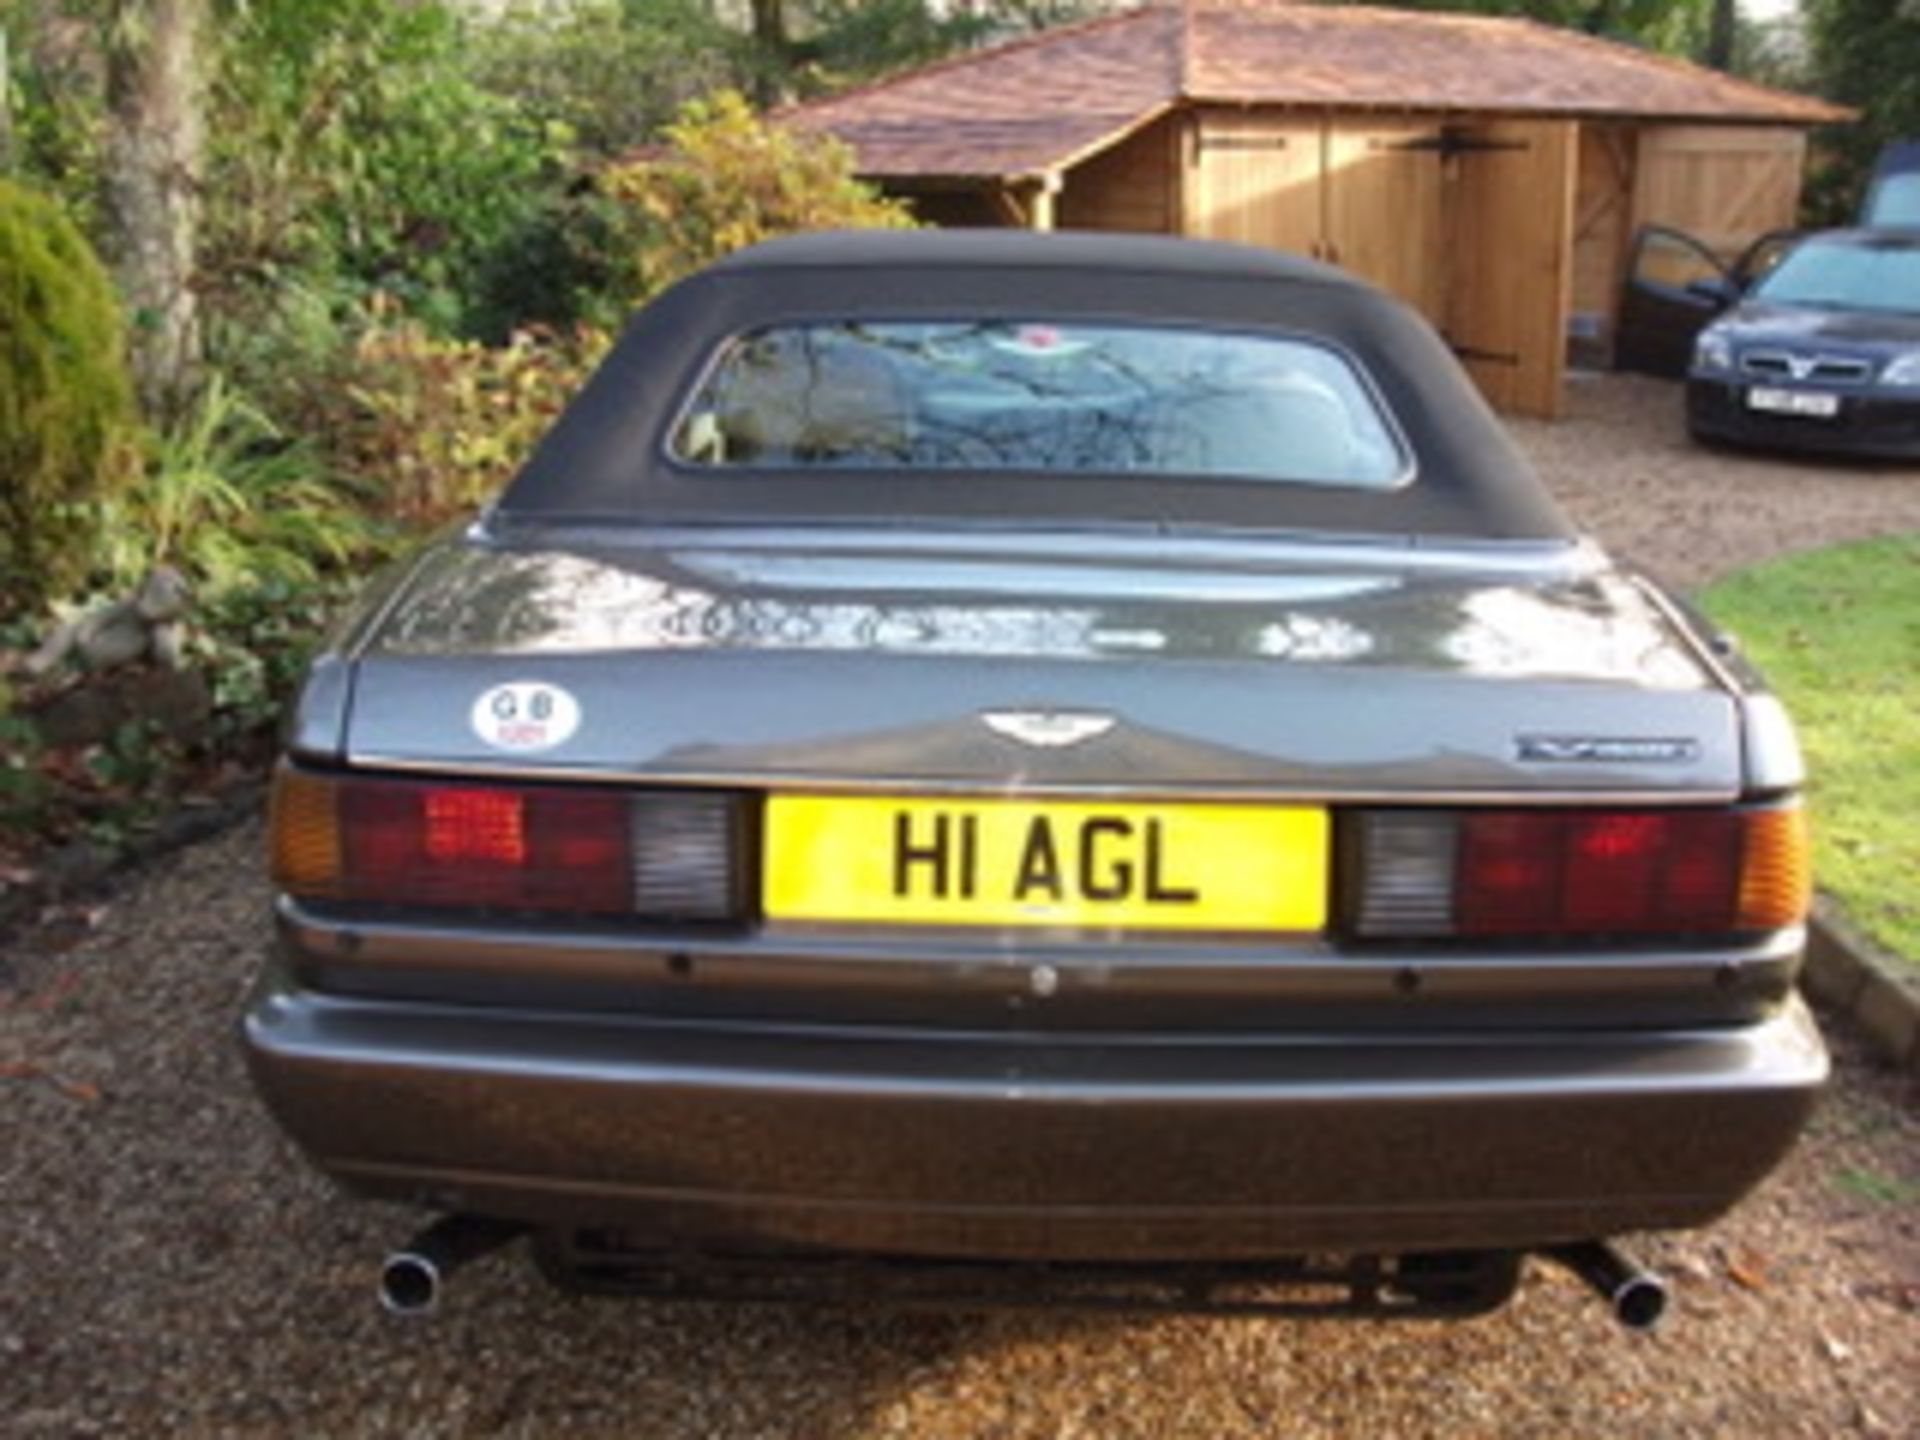 1993 Aston Martin Virage Volante - Having 11 months MOT and aviators number plate H1 AGL - Image 22 of 48